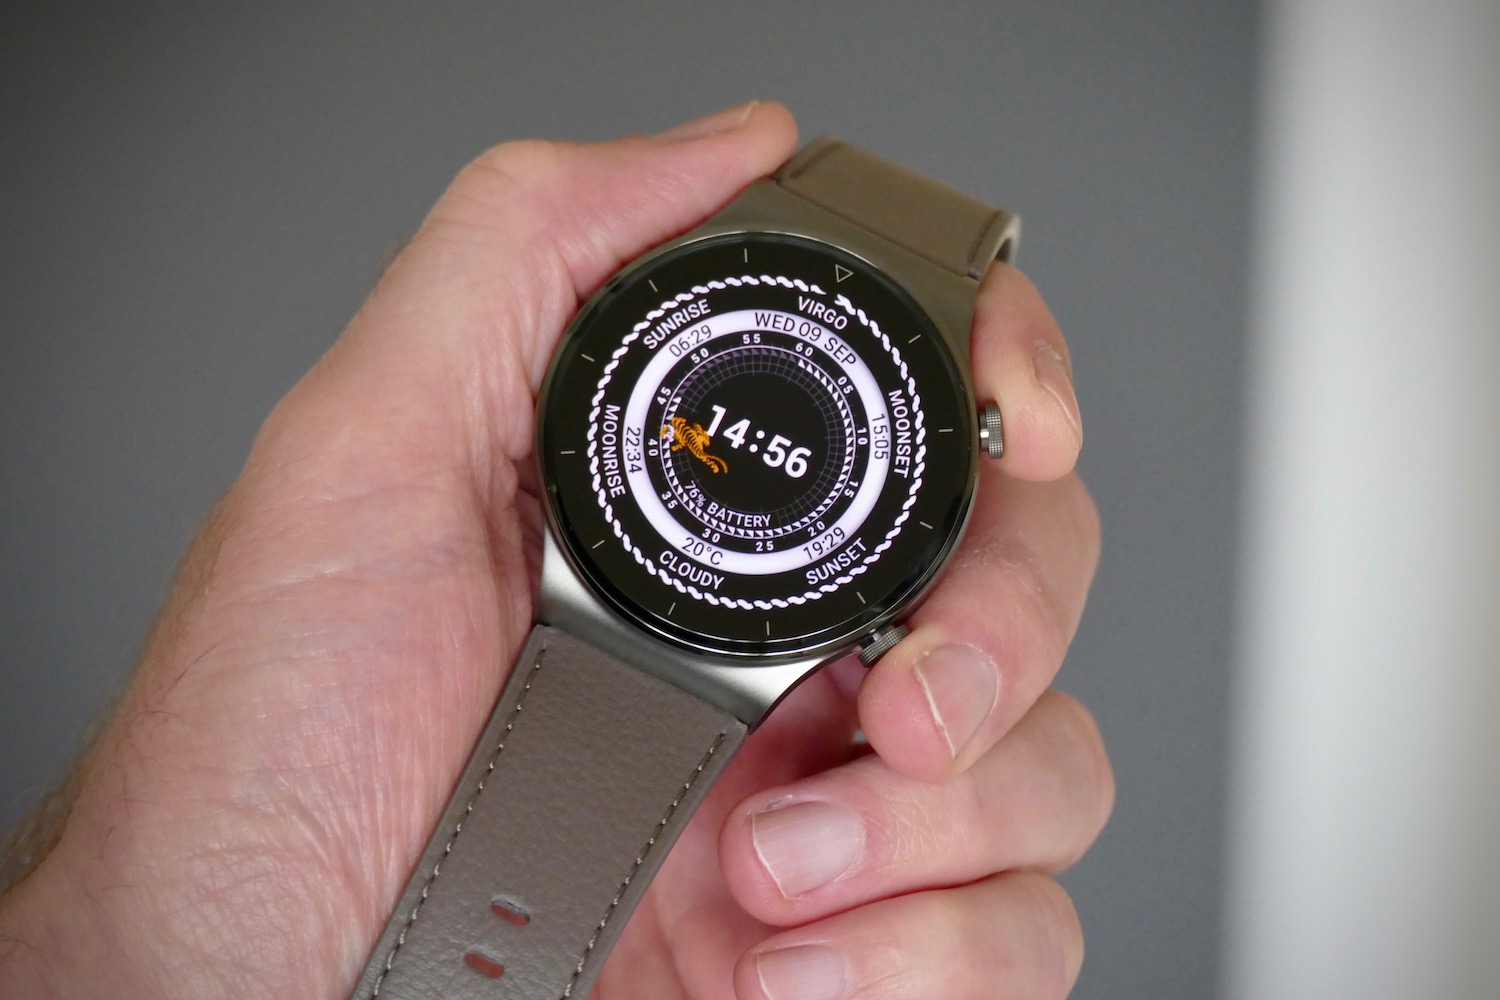 Huawei Watch GT2 Pro Hands on Review: Upscale Fitness Watch